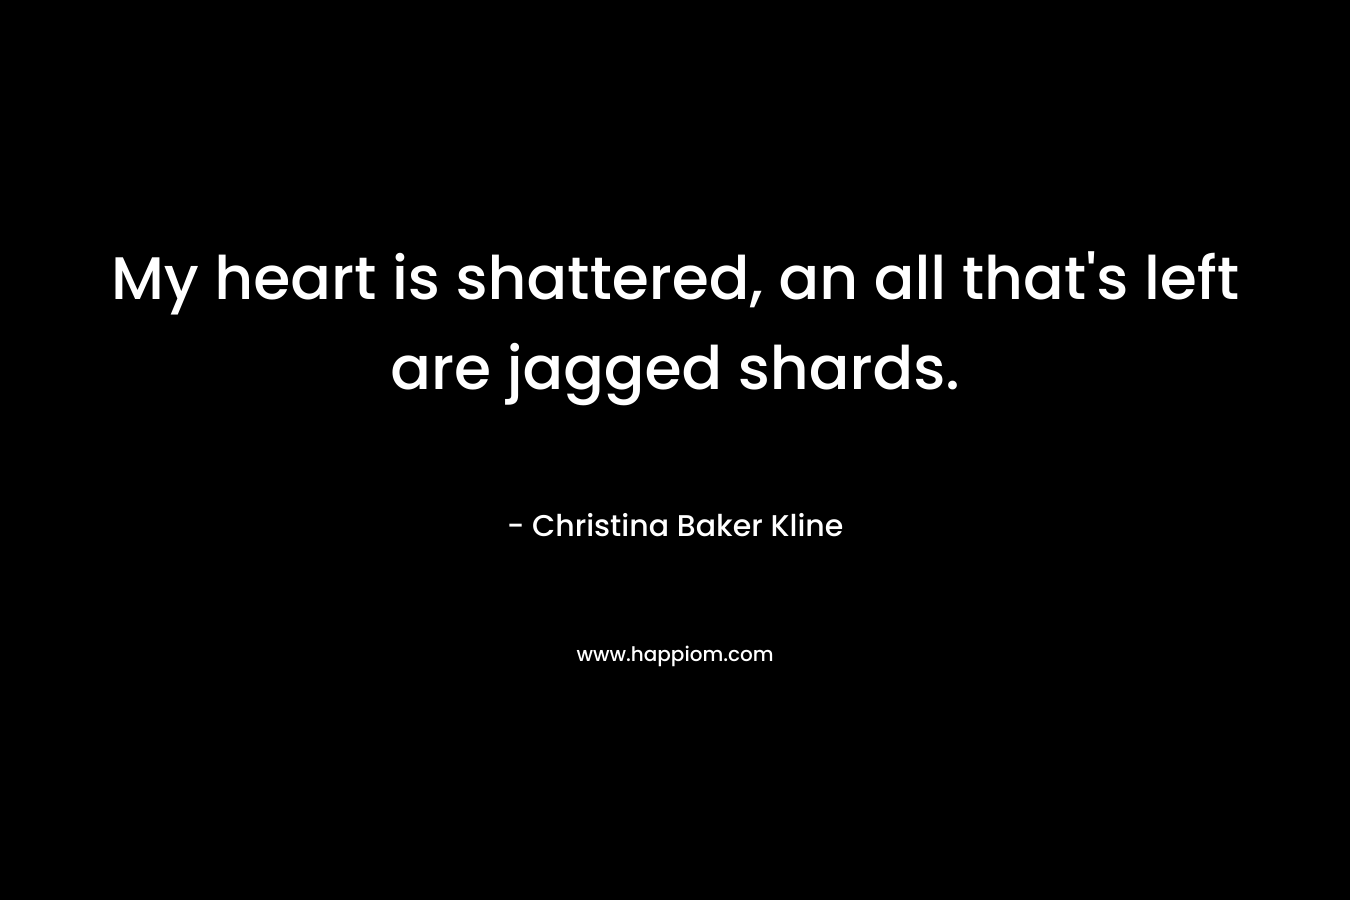 My heart is shattered, an all that’s left are jagged shards. – Christina Baker Kline